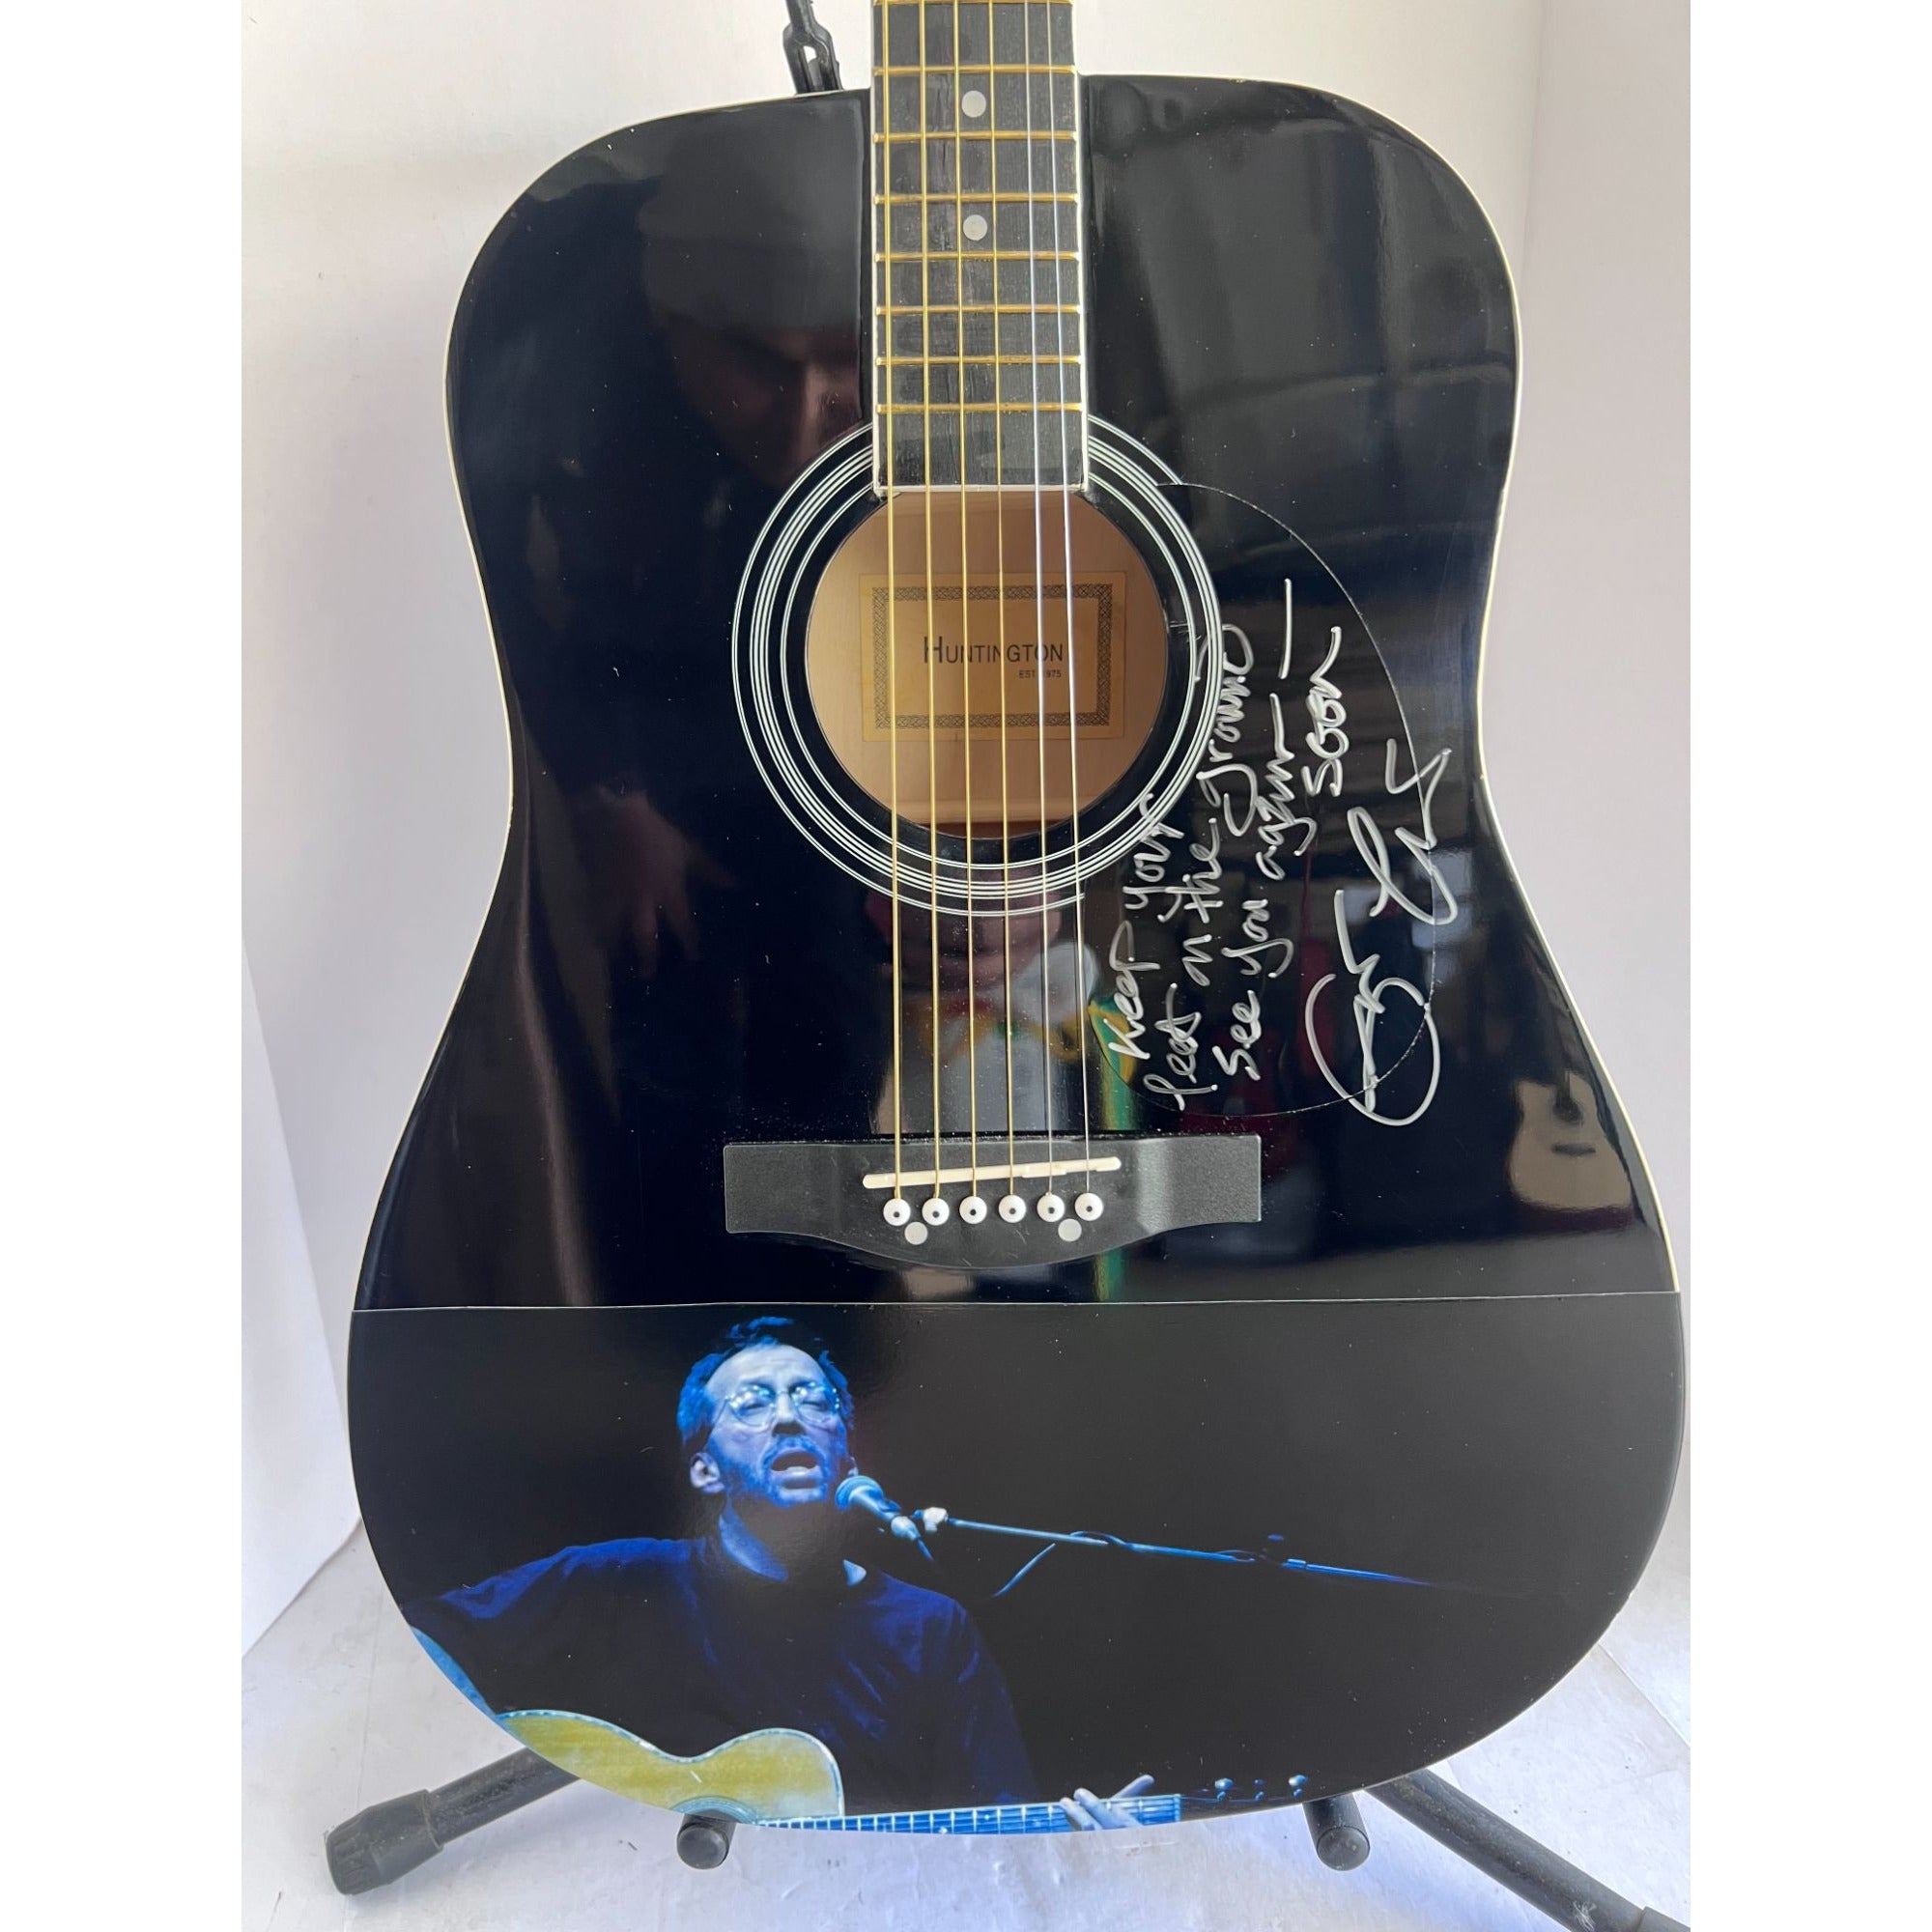 Eric Clapton incredible signed and inscribed "keep your feet on the ground see you soon" full size acoustic guitar one of a kind